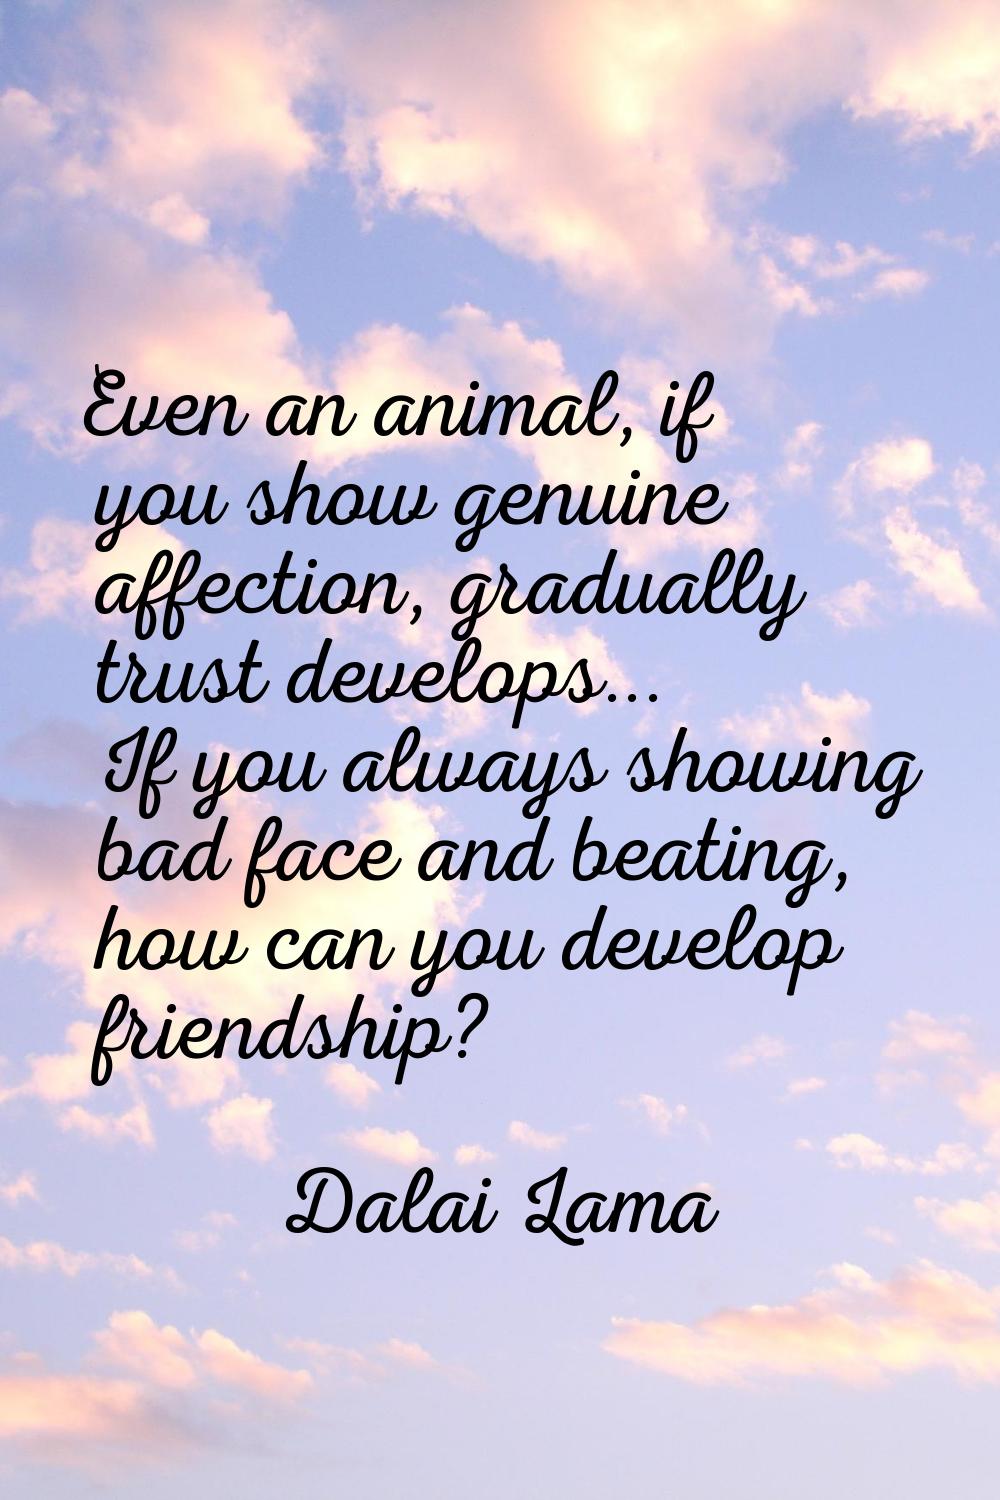 Even an animal, if you show genuine affection, gradually trust develops... If you always showing ba